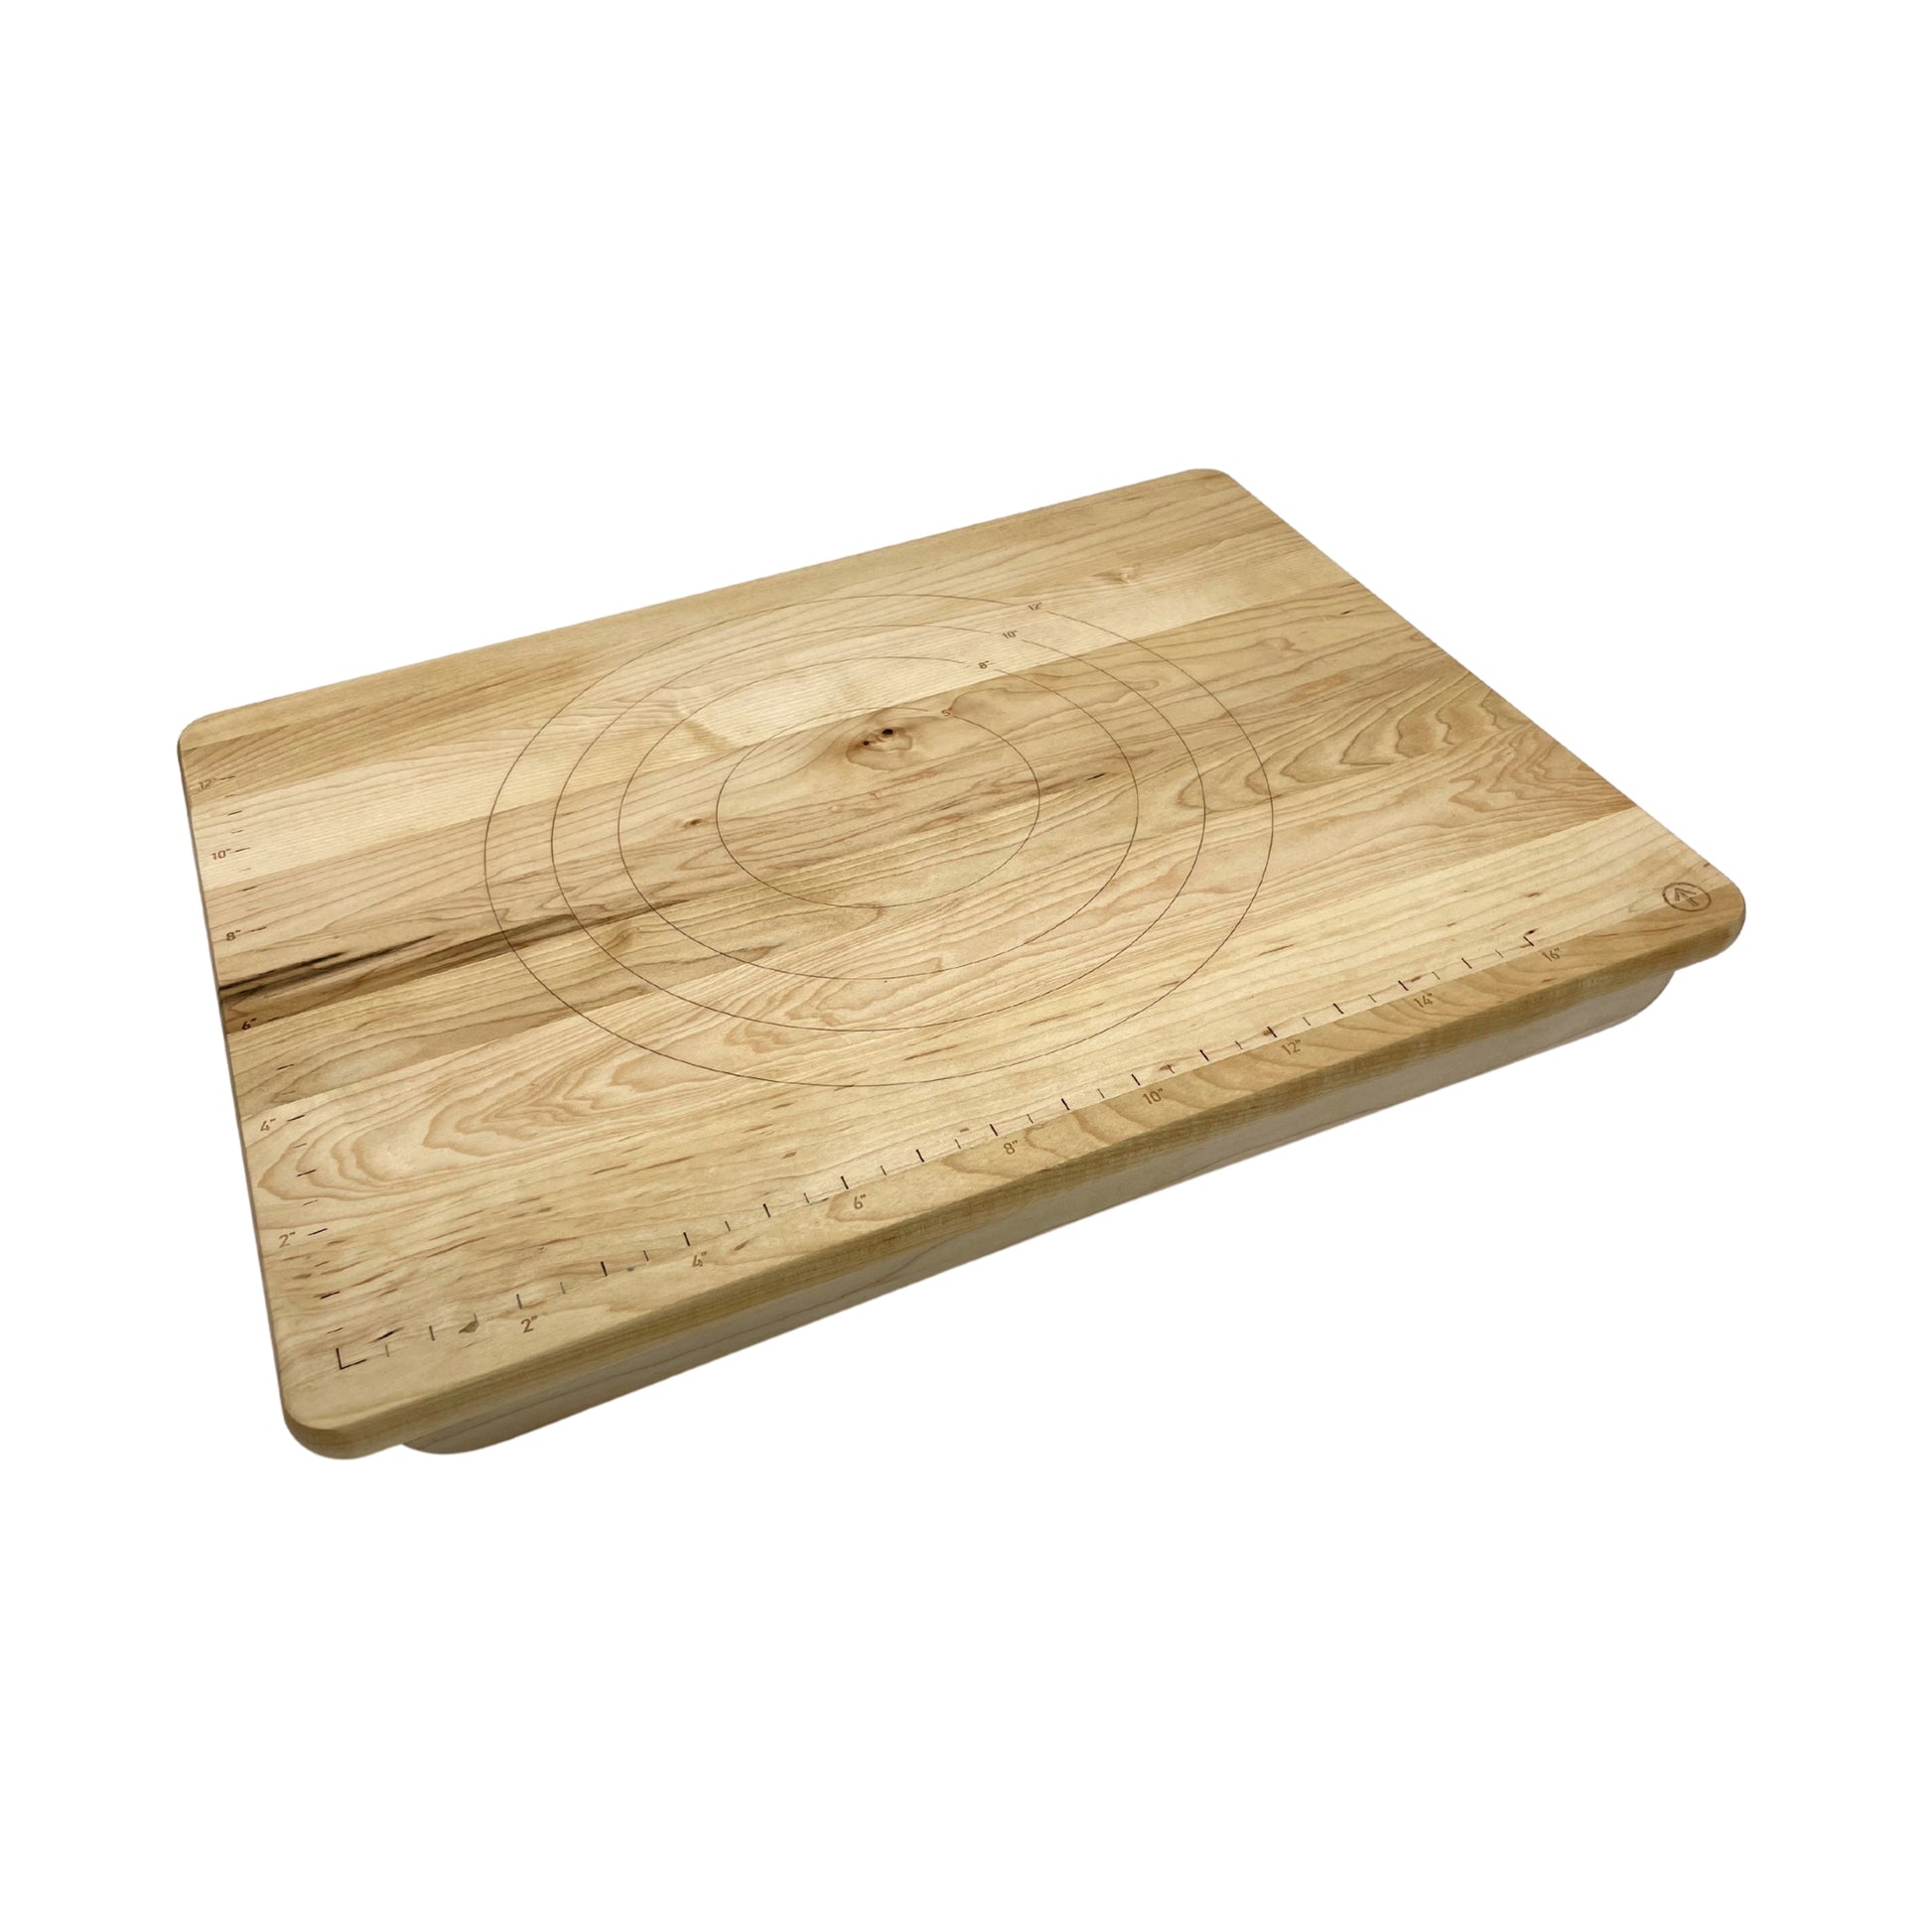 Acacia Wood Cutting/ Charcuterie Board - Small Round, 1 Pack - Baker's